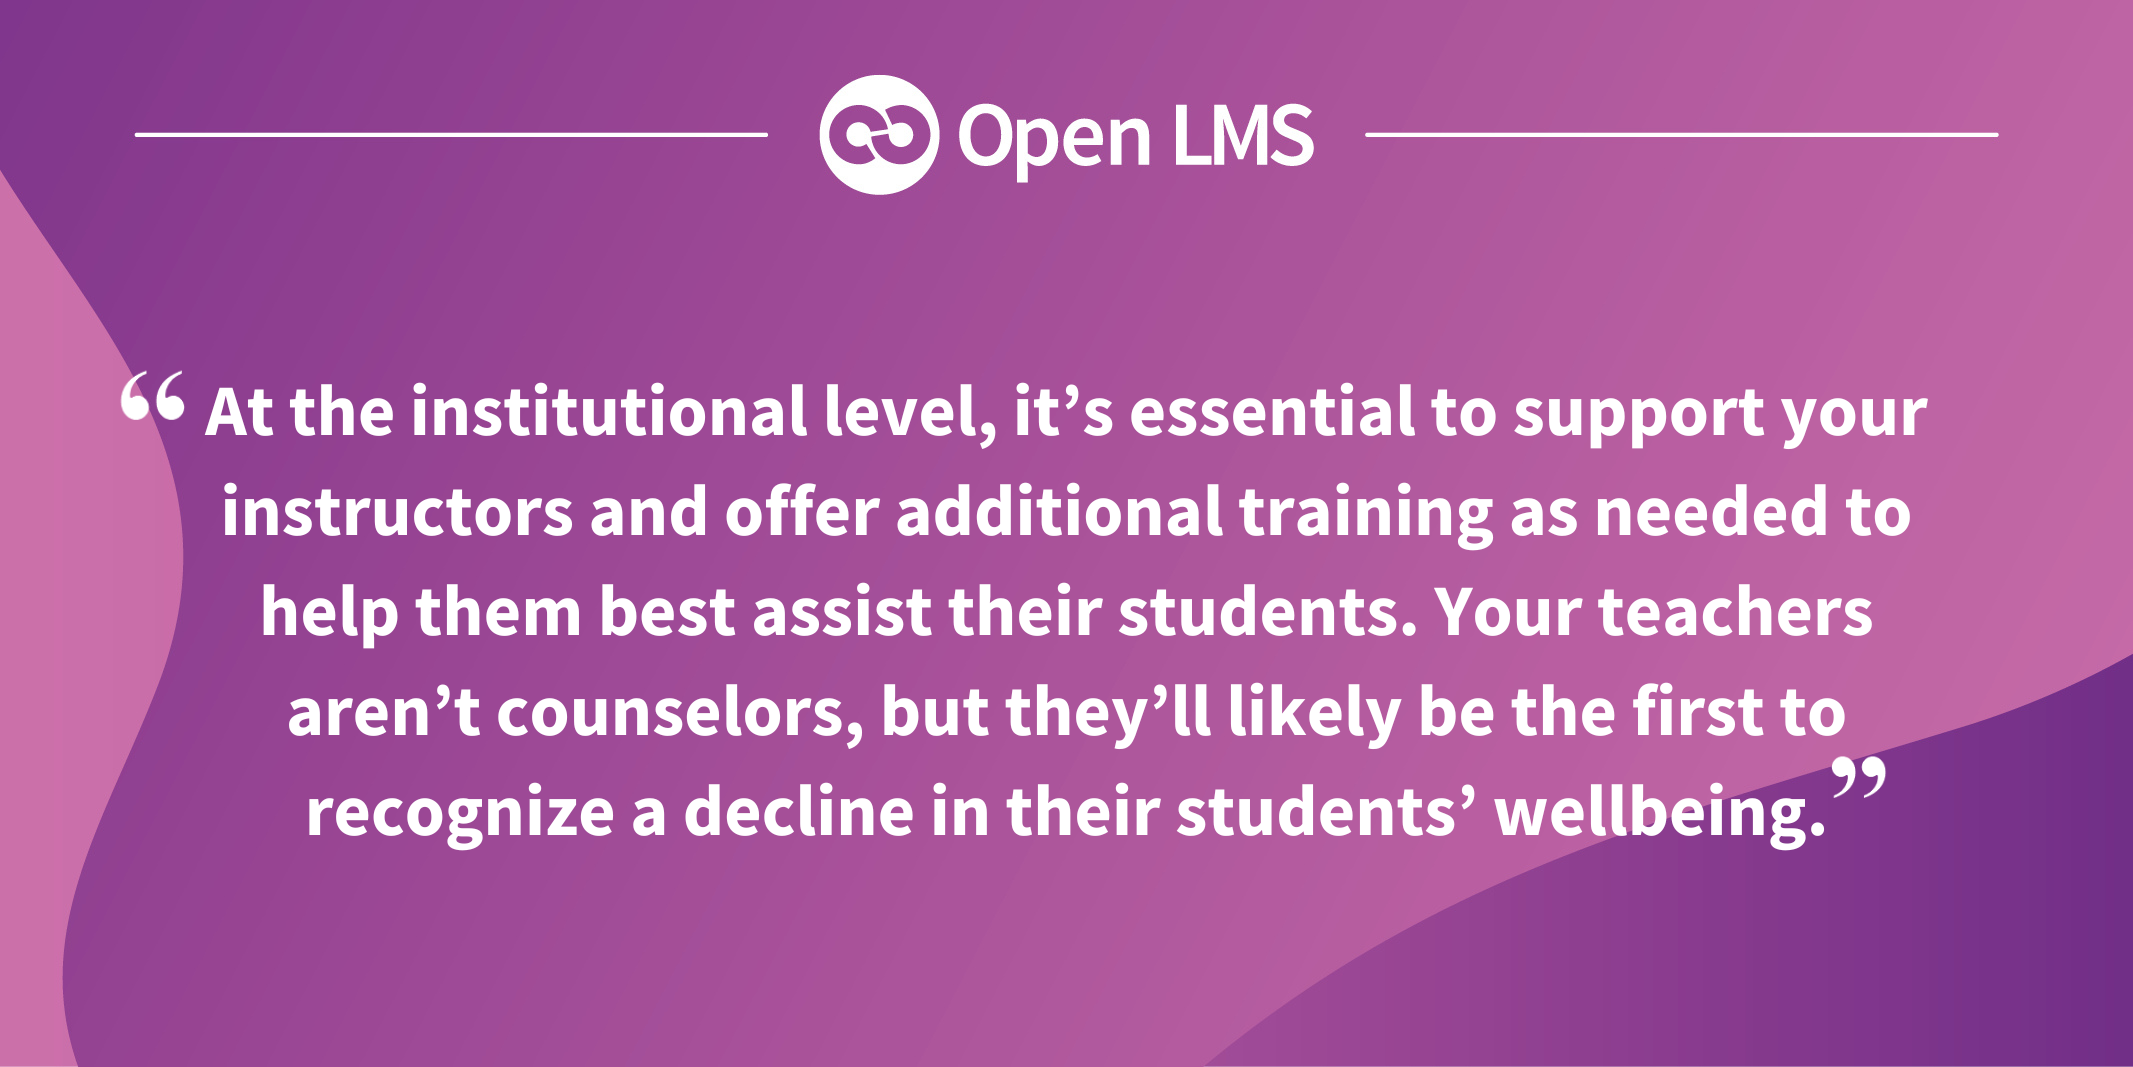 At the institutional level, it’s essential to support your instructors and offer additional training as needed to help them best assist their students. Your teachers aren’t counselors, but they’ll likely be the first to recognize a decline in their students’ wellbeing